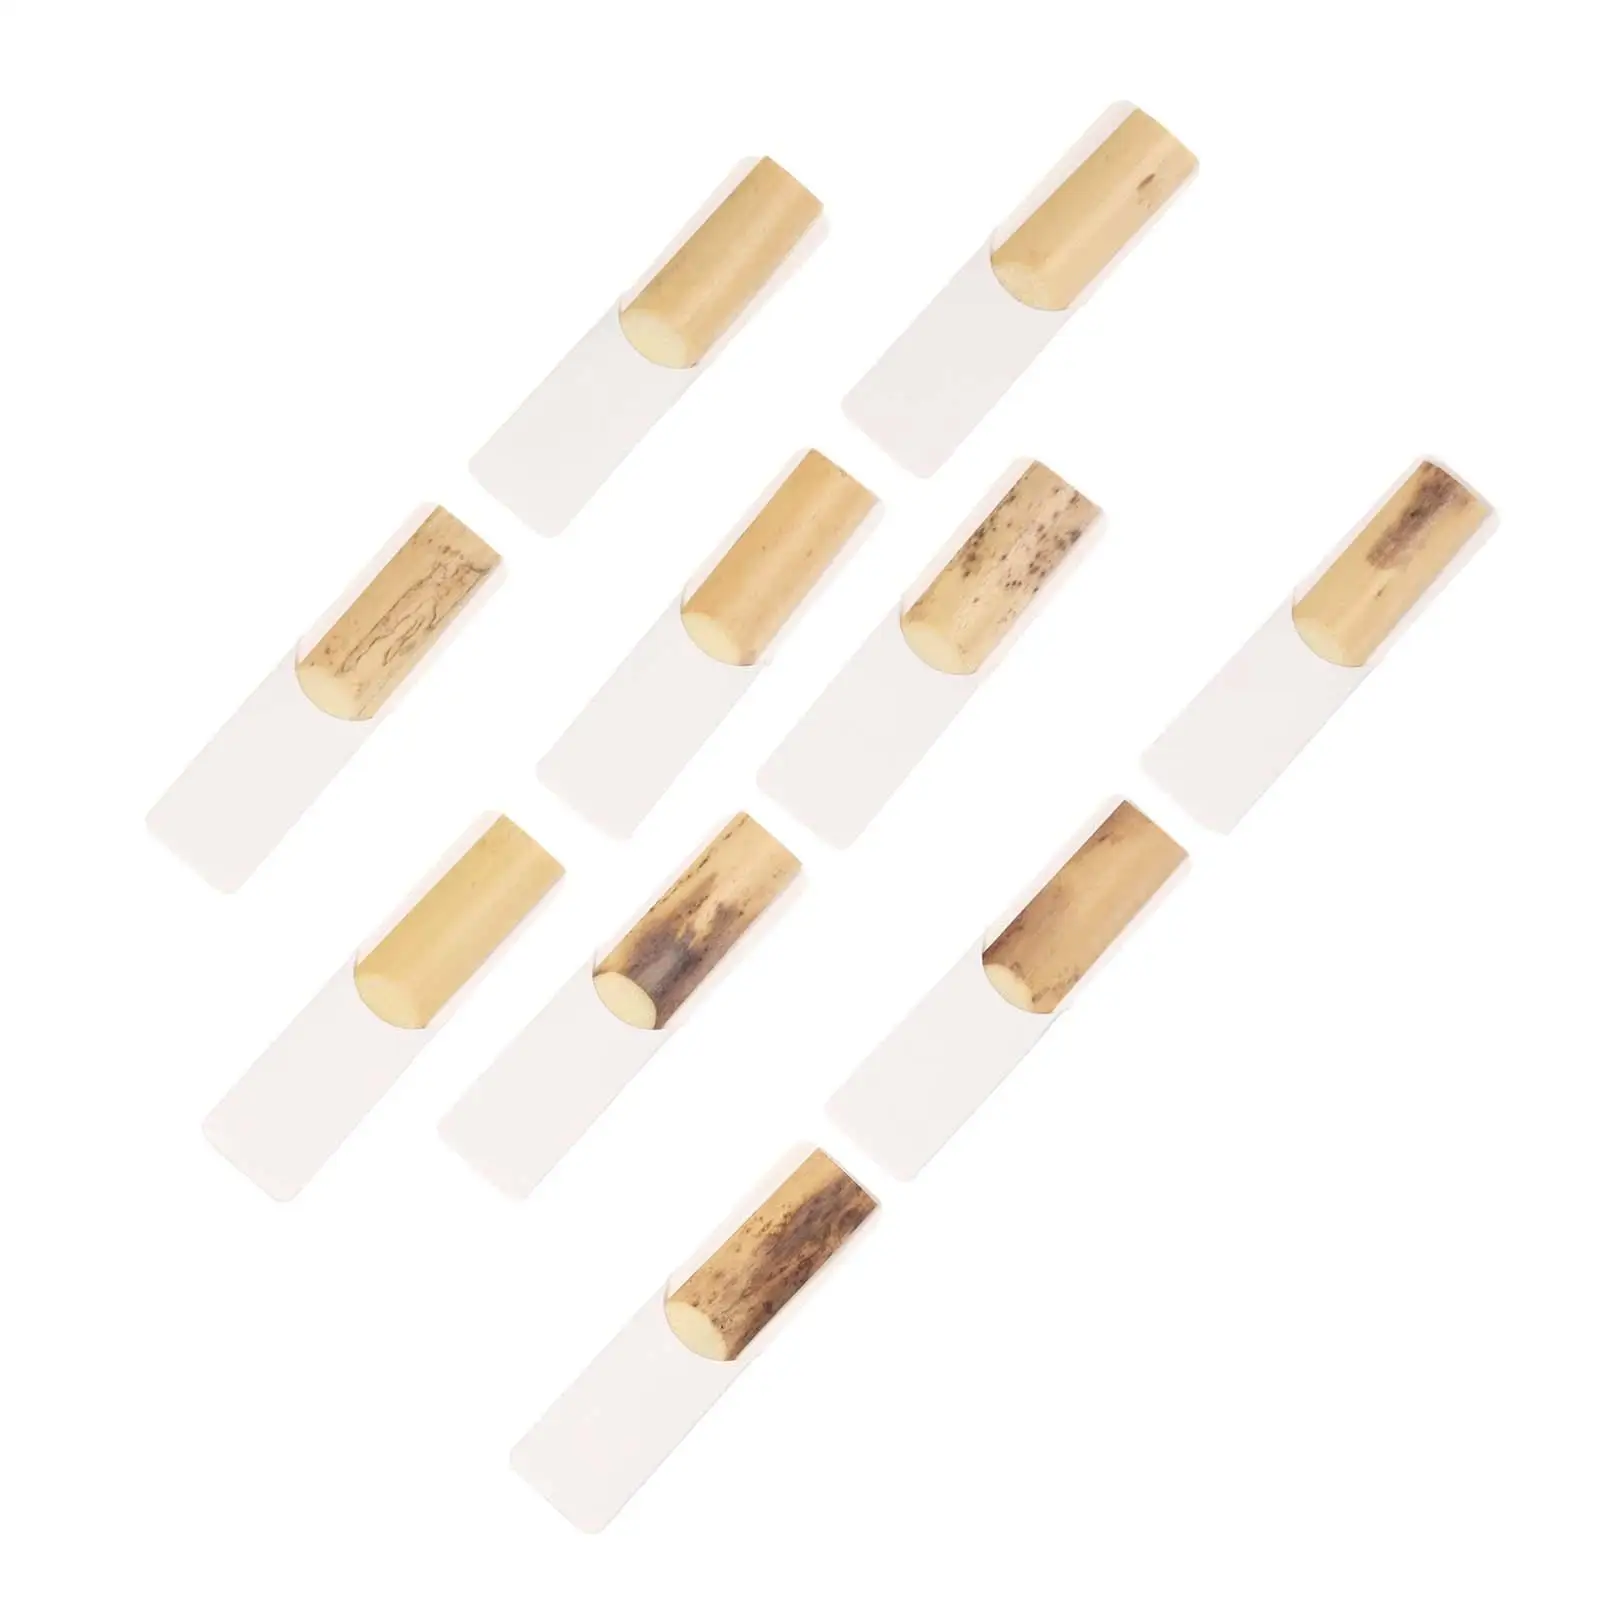 10x Alto Saxophone Reeds Replacement Strength 2.5 Durable Accessory Alto Sax Reeds for Beginner Woodwind Instrument Alto Sax